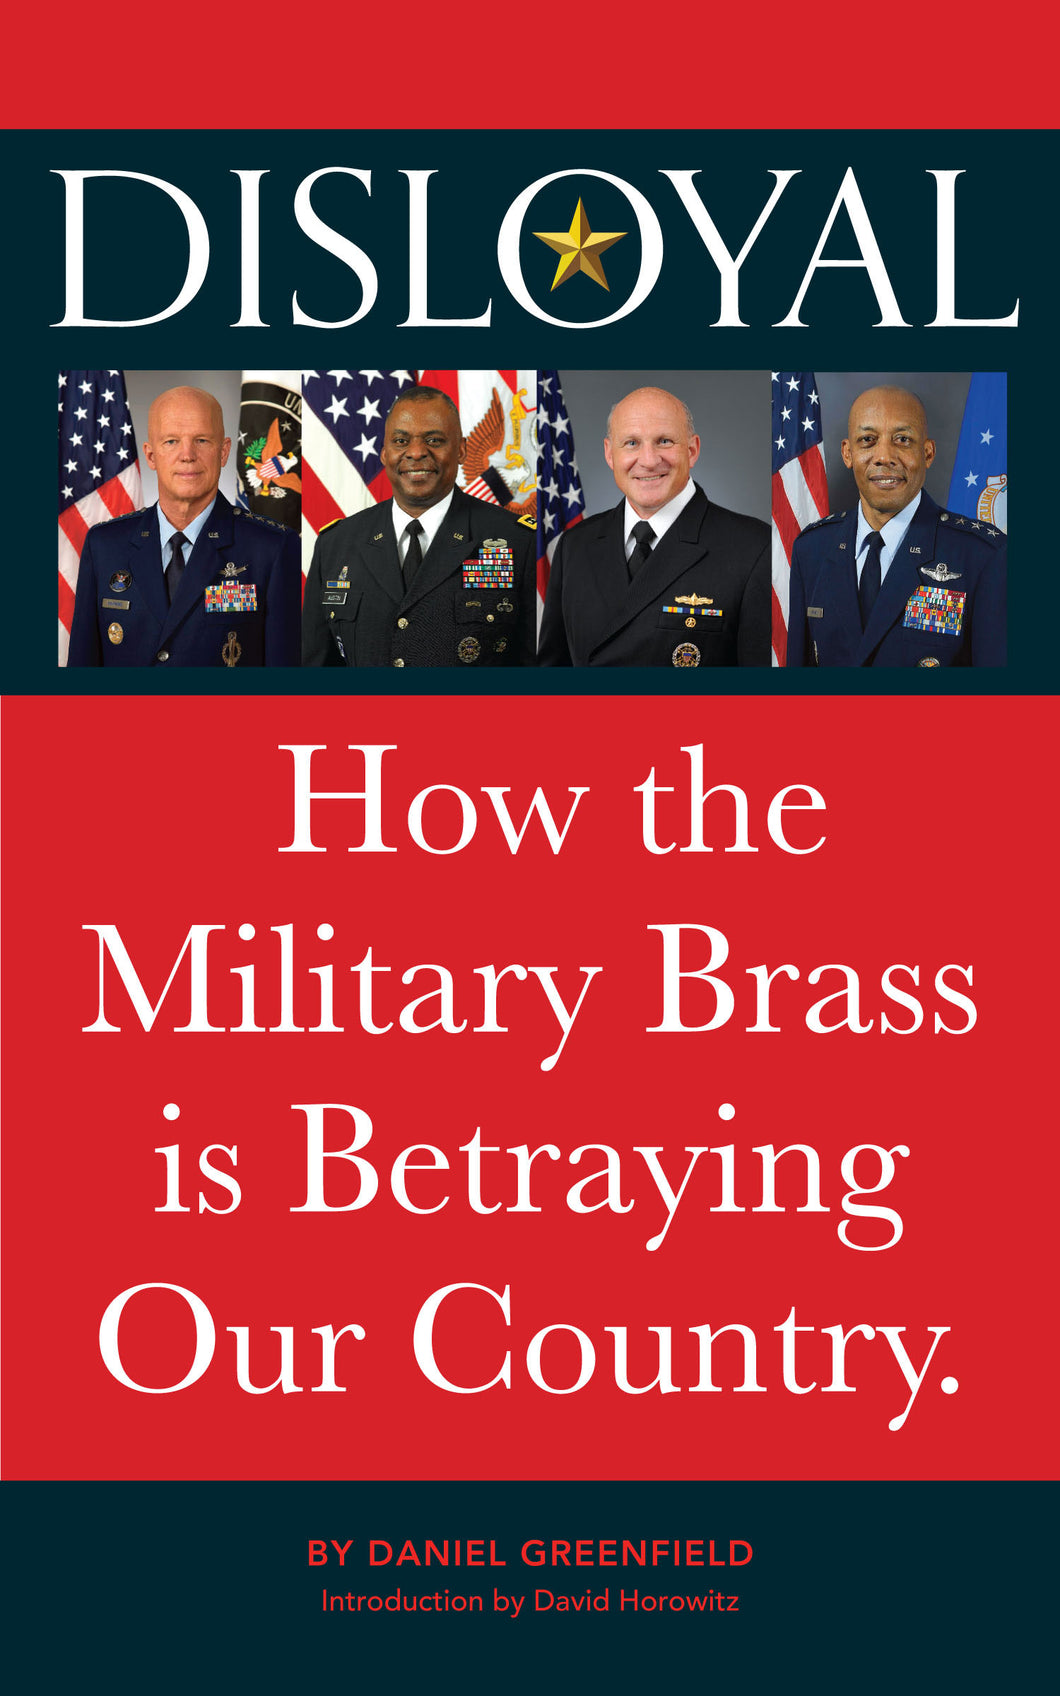 Disloyal: How the Military Brass is Betraying Our Country